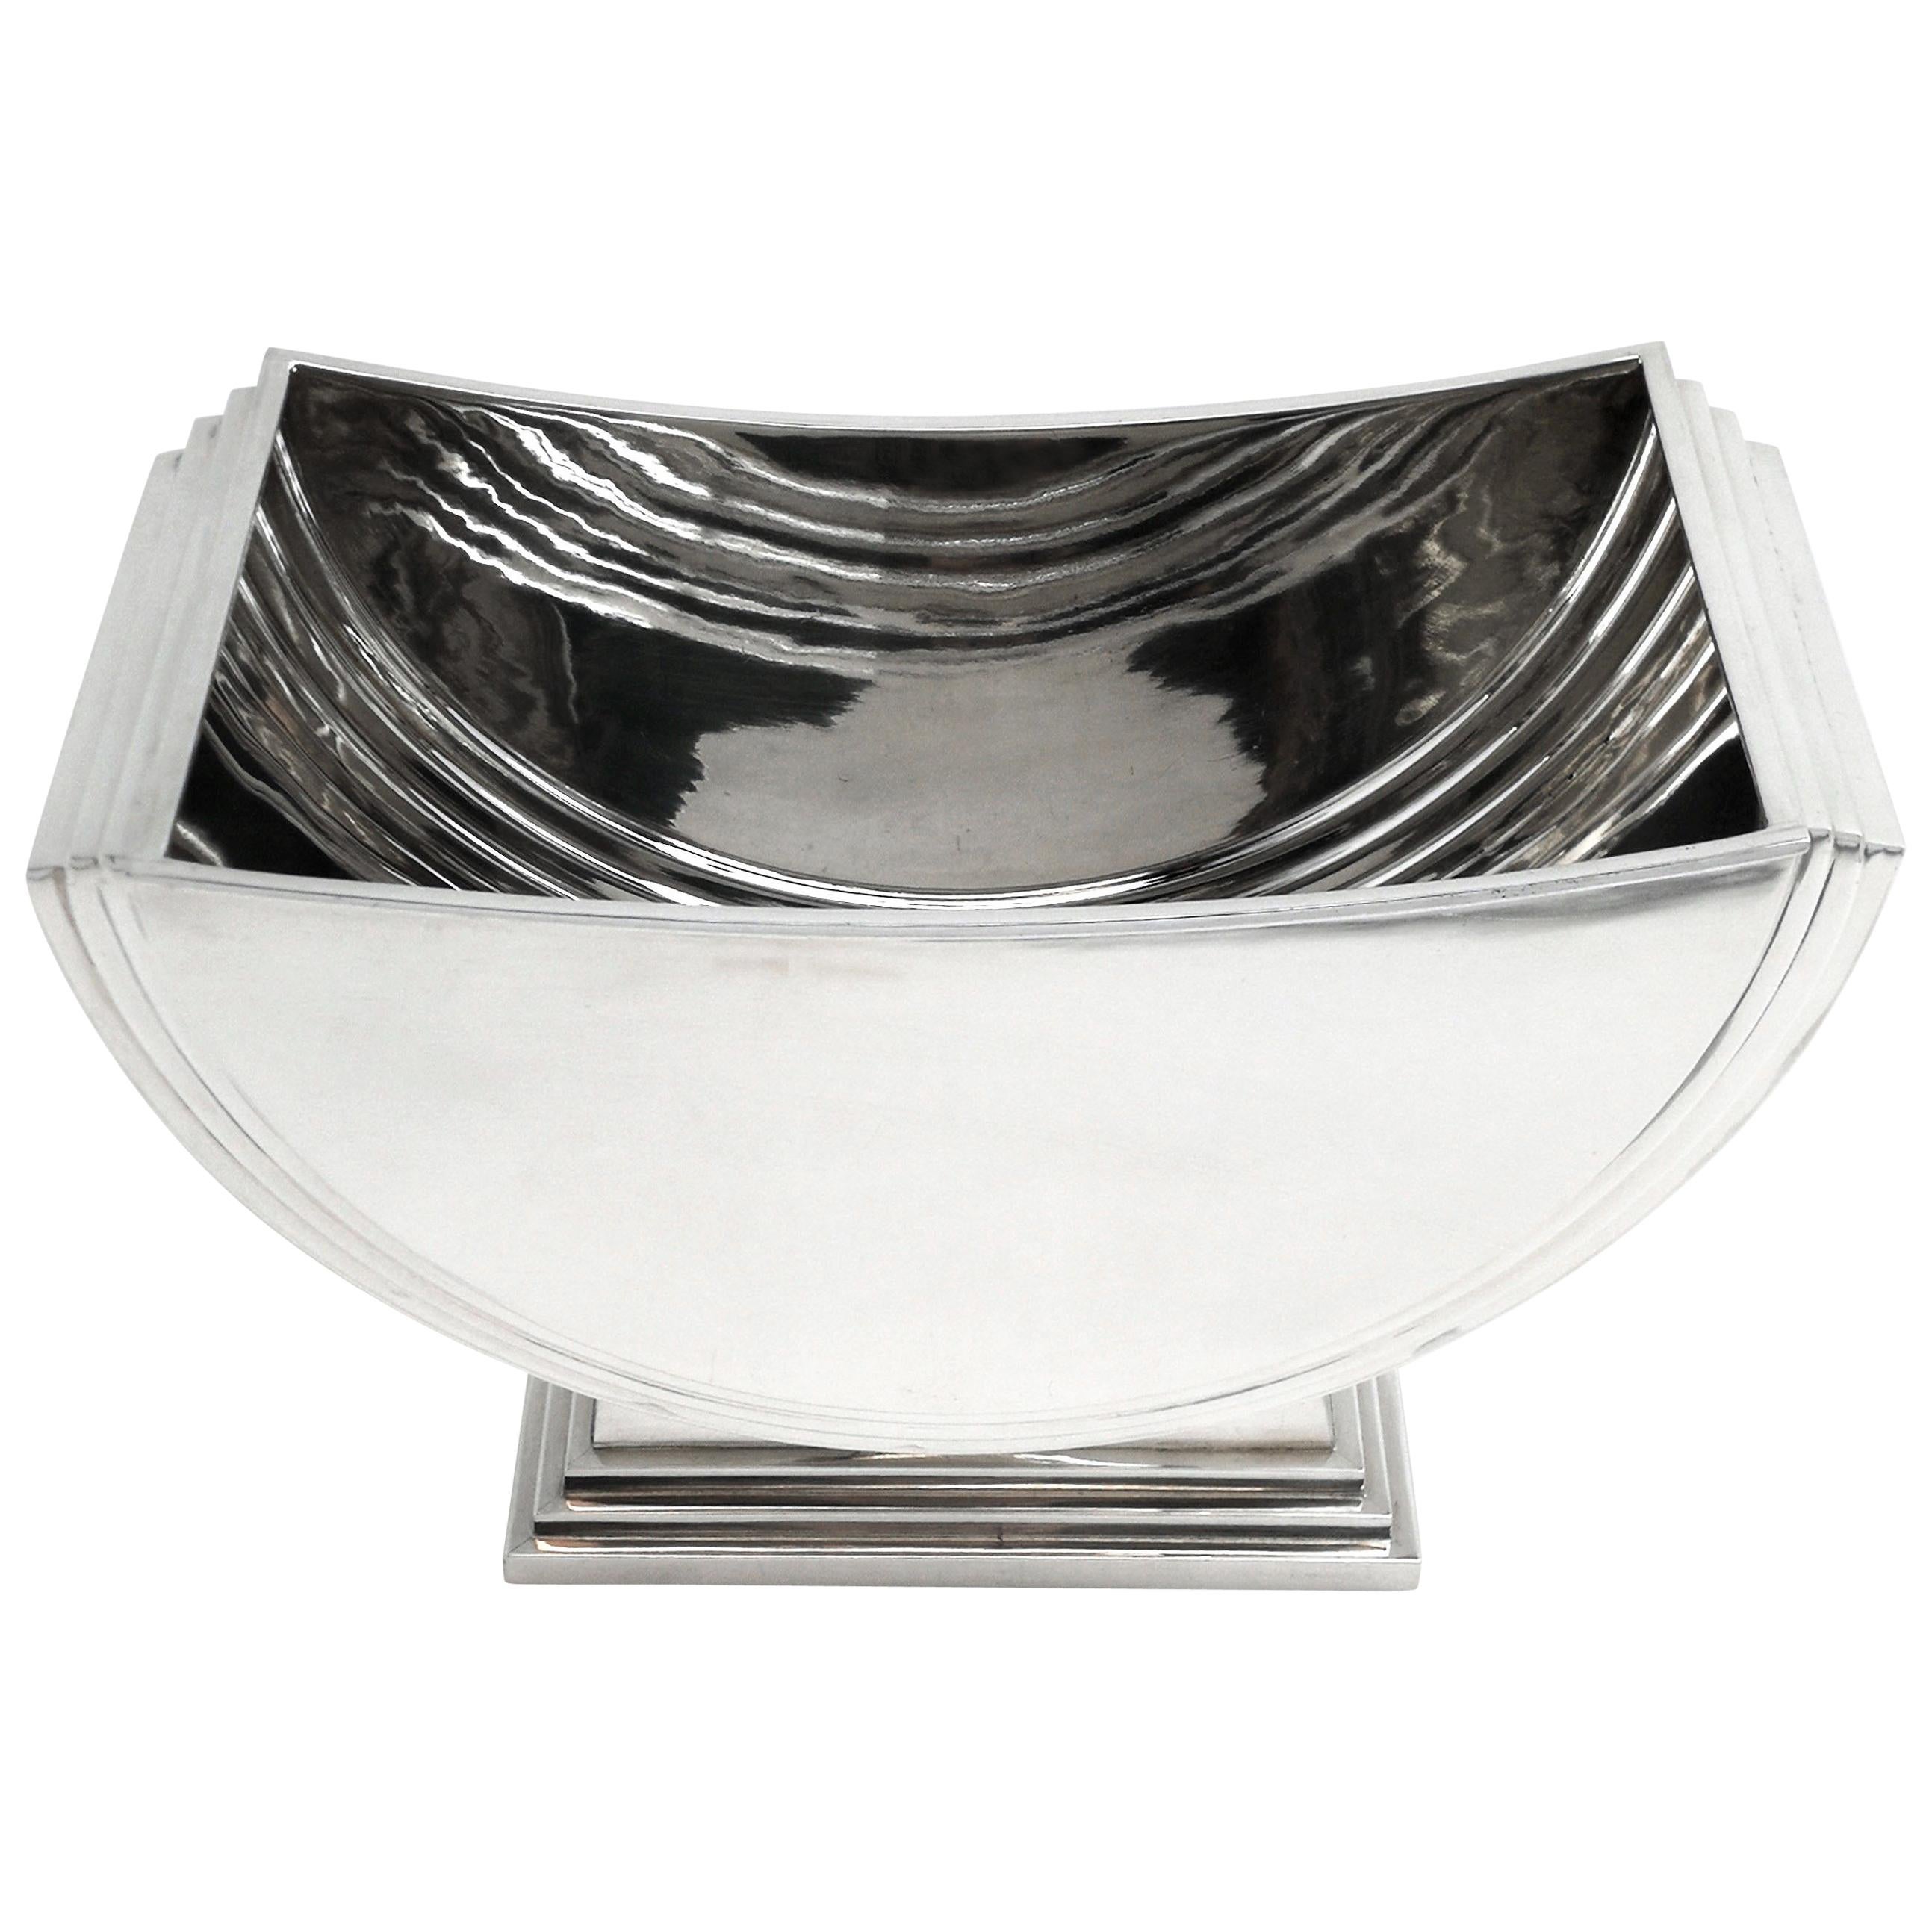 Sterling Silver Bowl / Champagne Cooler Art Deco Style 2013 Wine Ice Bucket